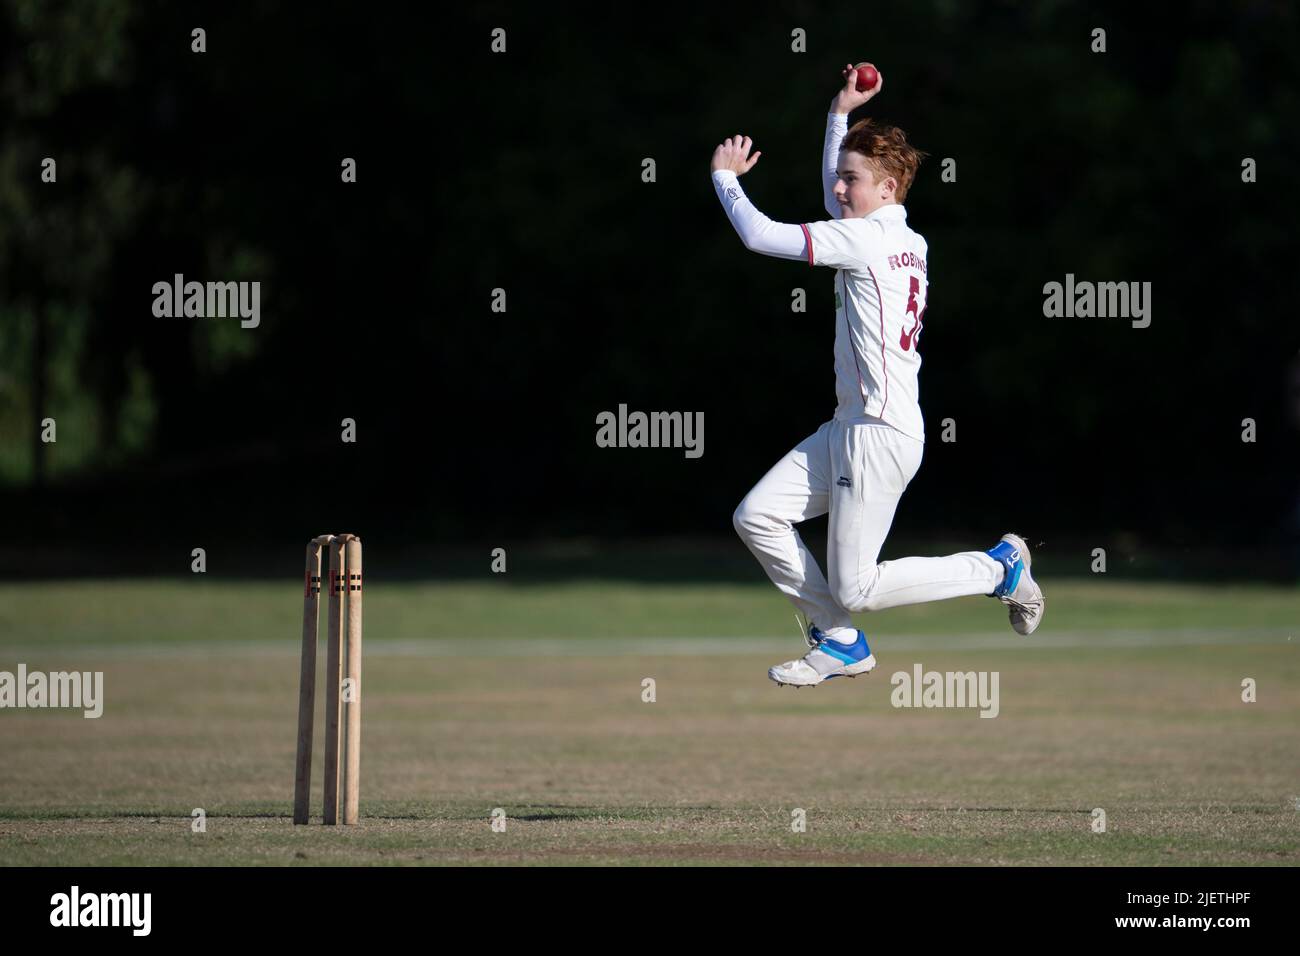 Teenage cricket bowler in action Stock Photo